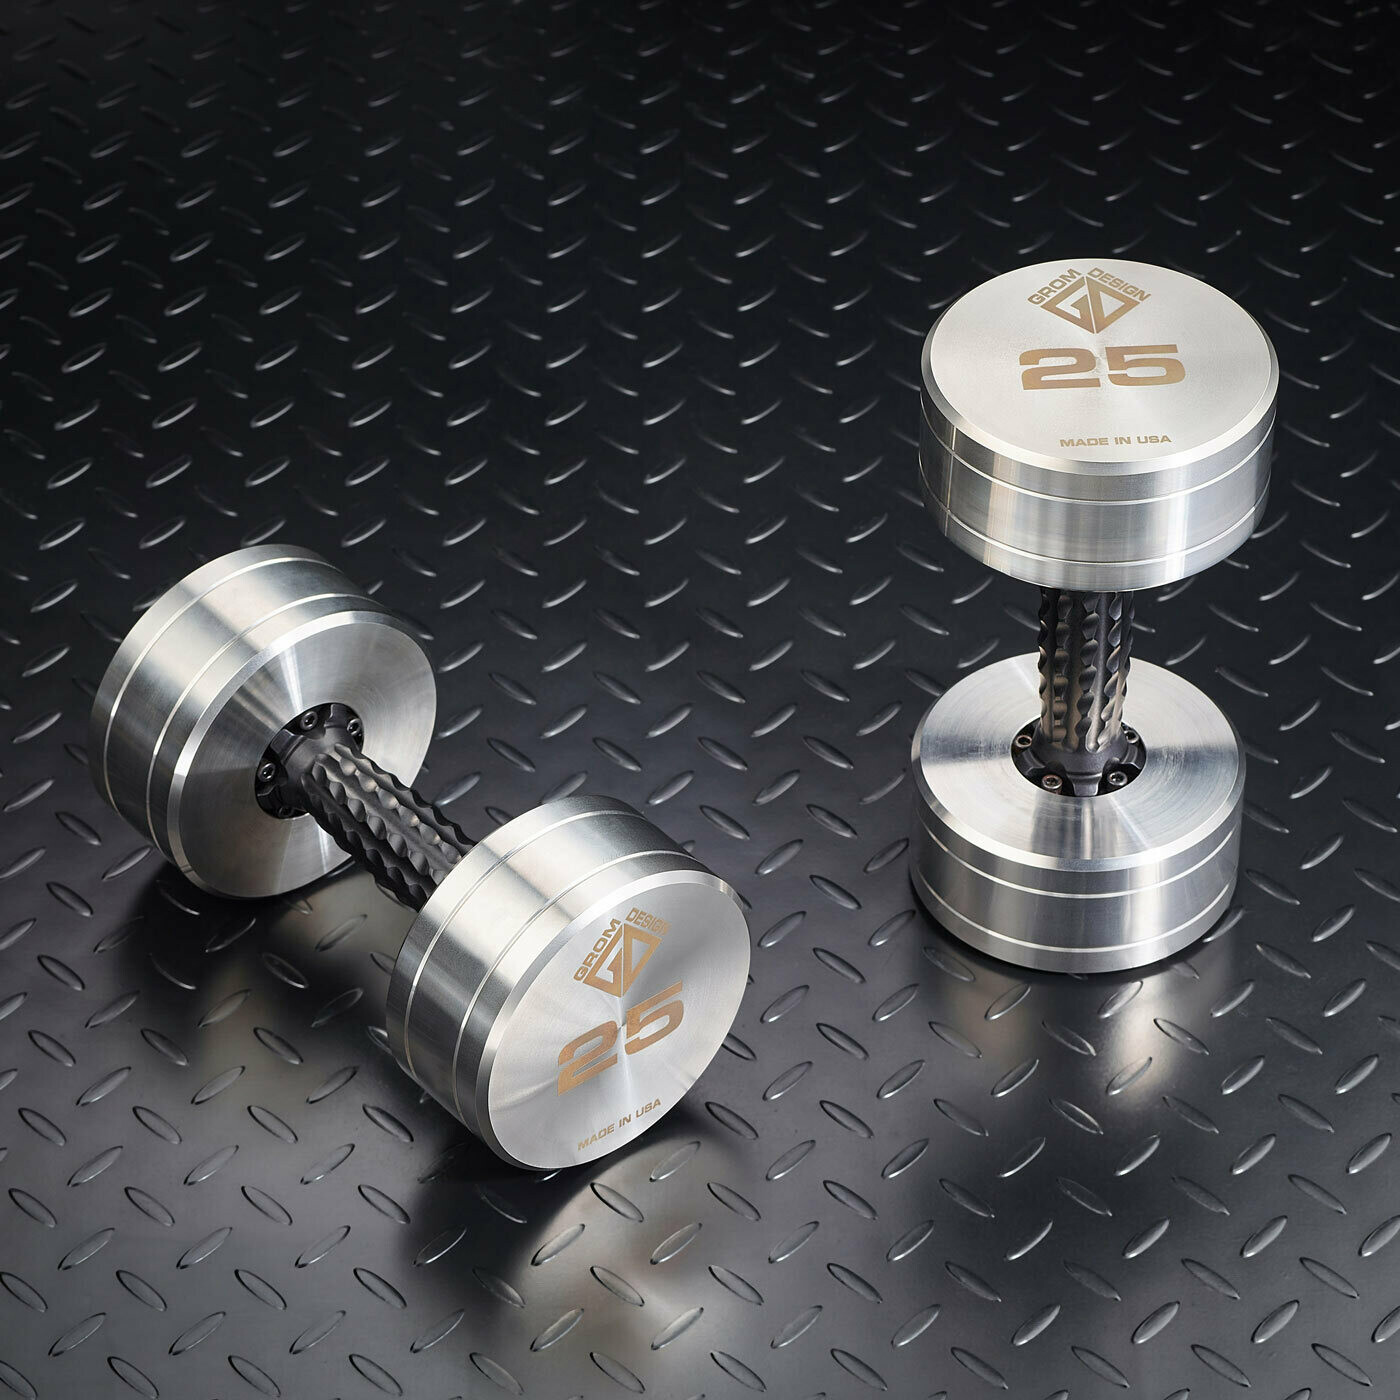 25 pound dumbbells Made in USA Stainless Steel CNC Machined